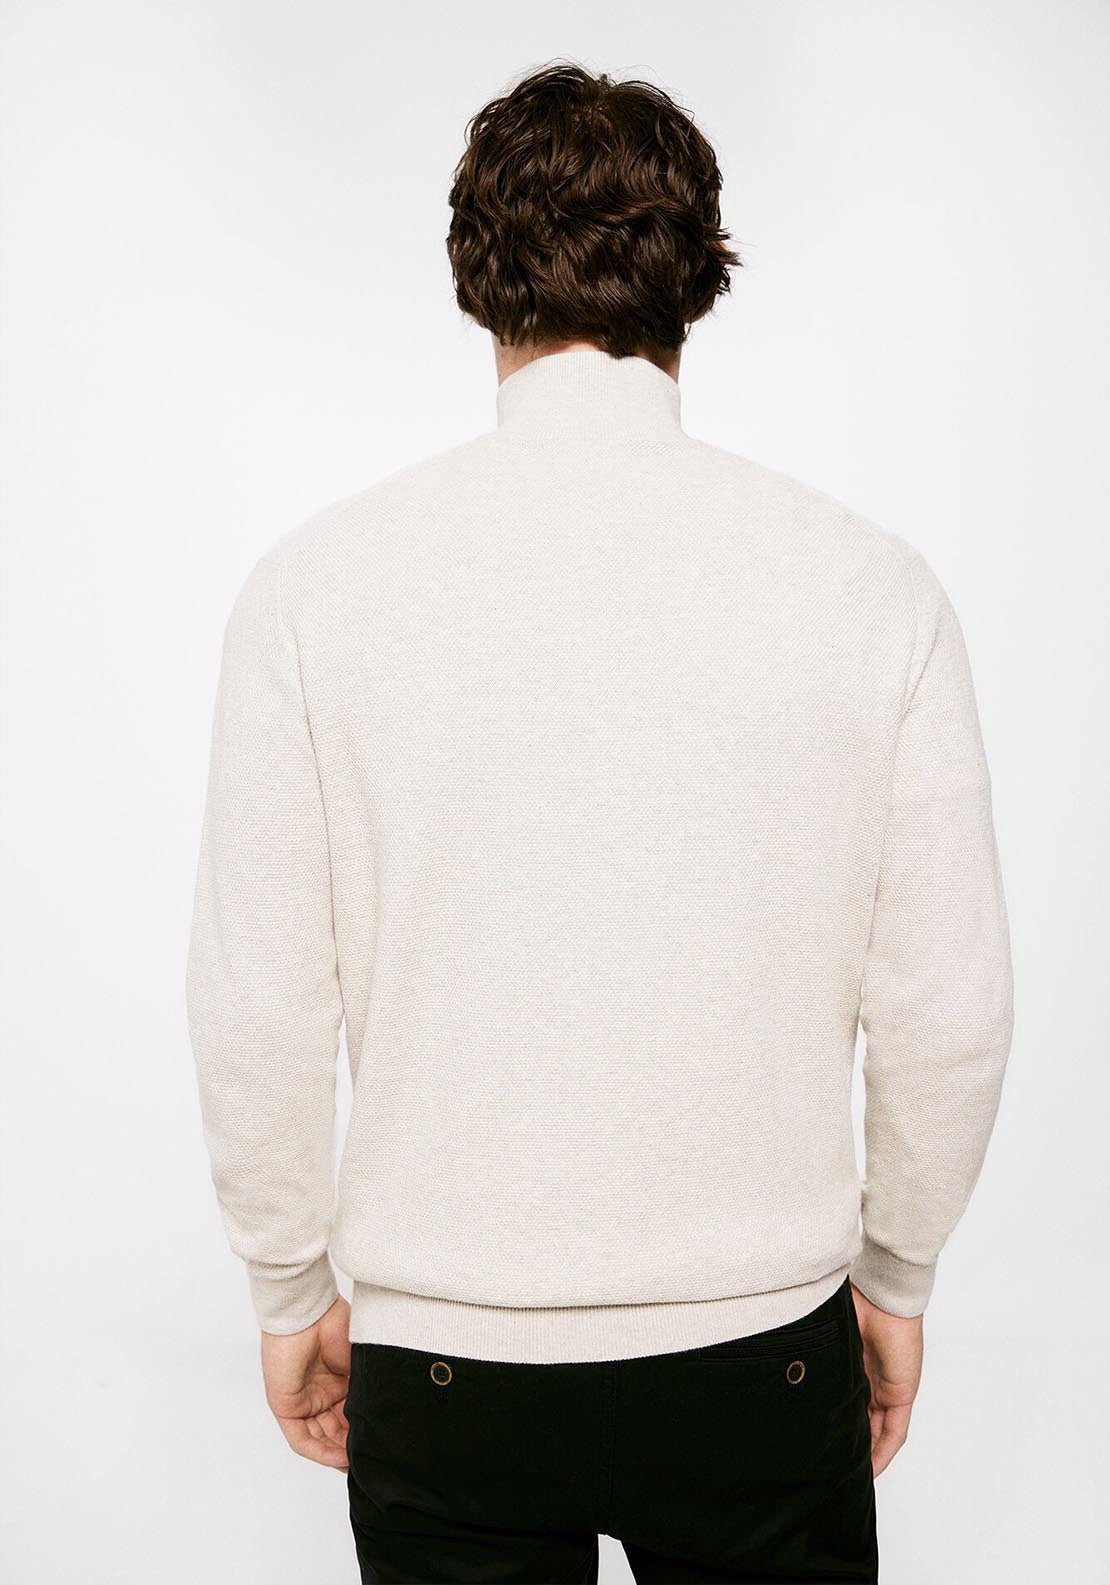 Springfield Structured jumper with zipped collar - Grey / Silver 3 Shaws Department Stores